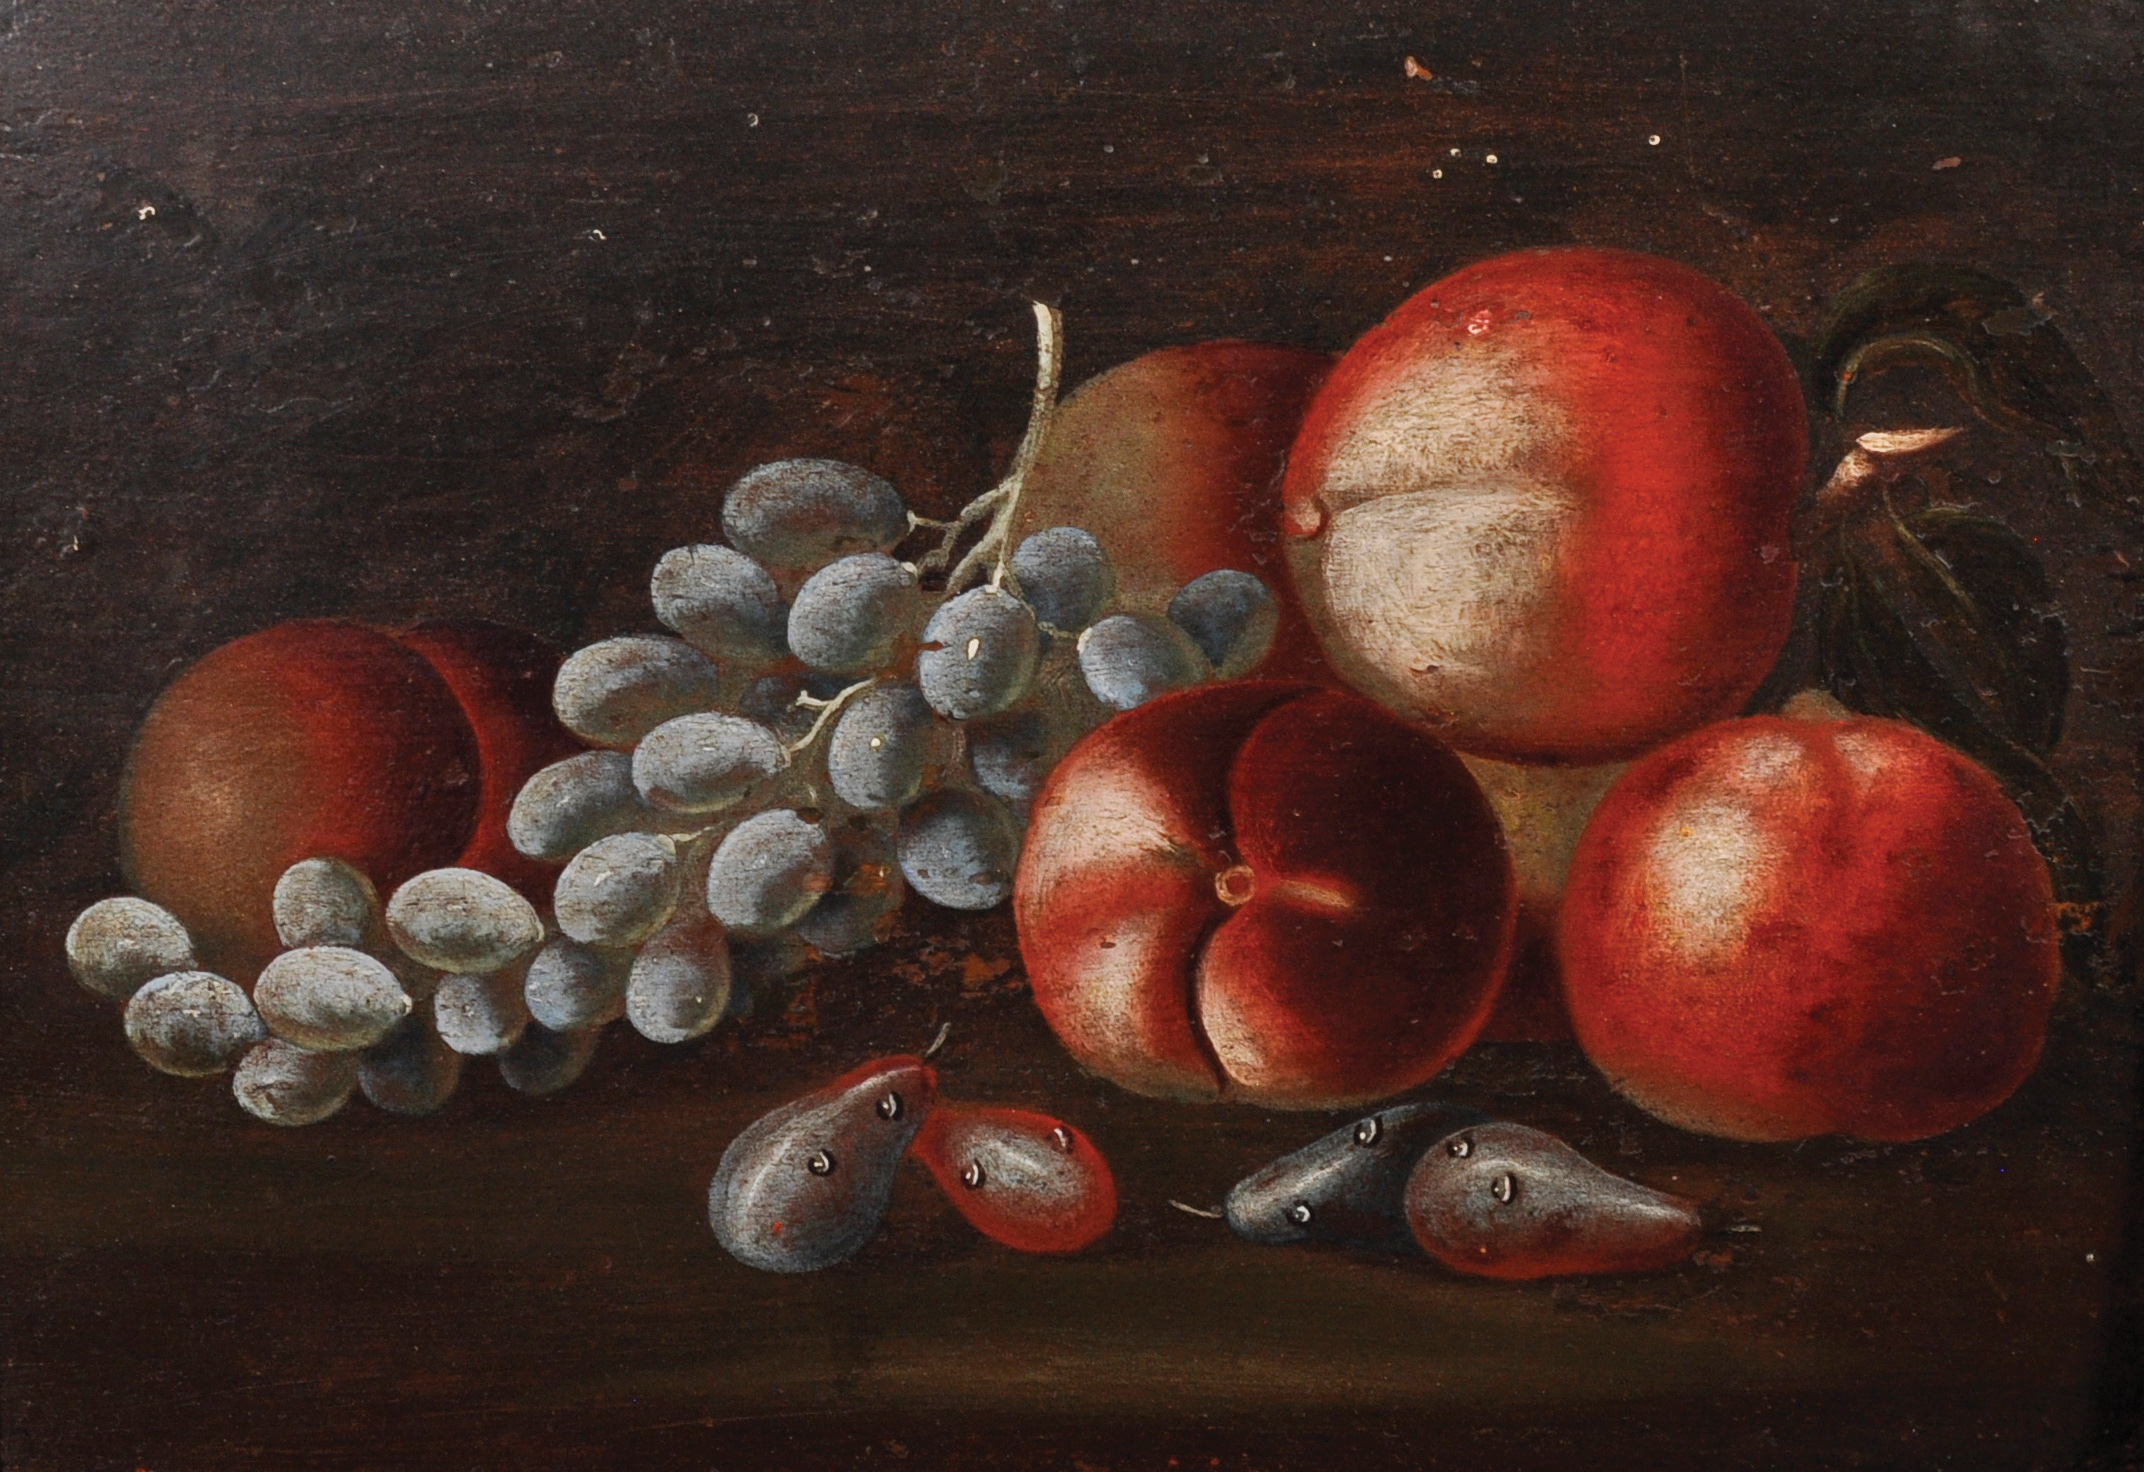 19th Century Italian School. A Still Life with Peaches, Pears and Grapes, Oil on Panel, 10.25" x